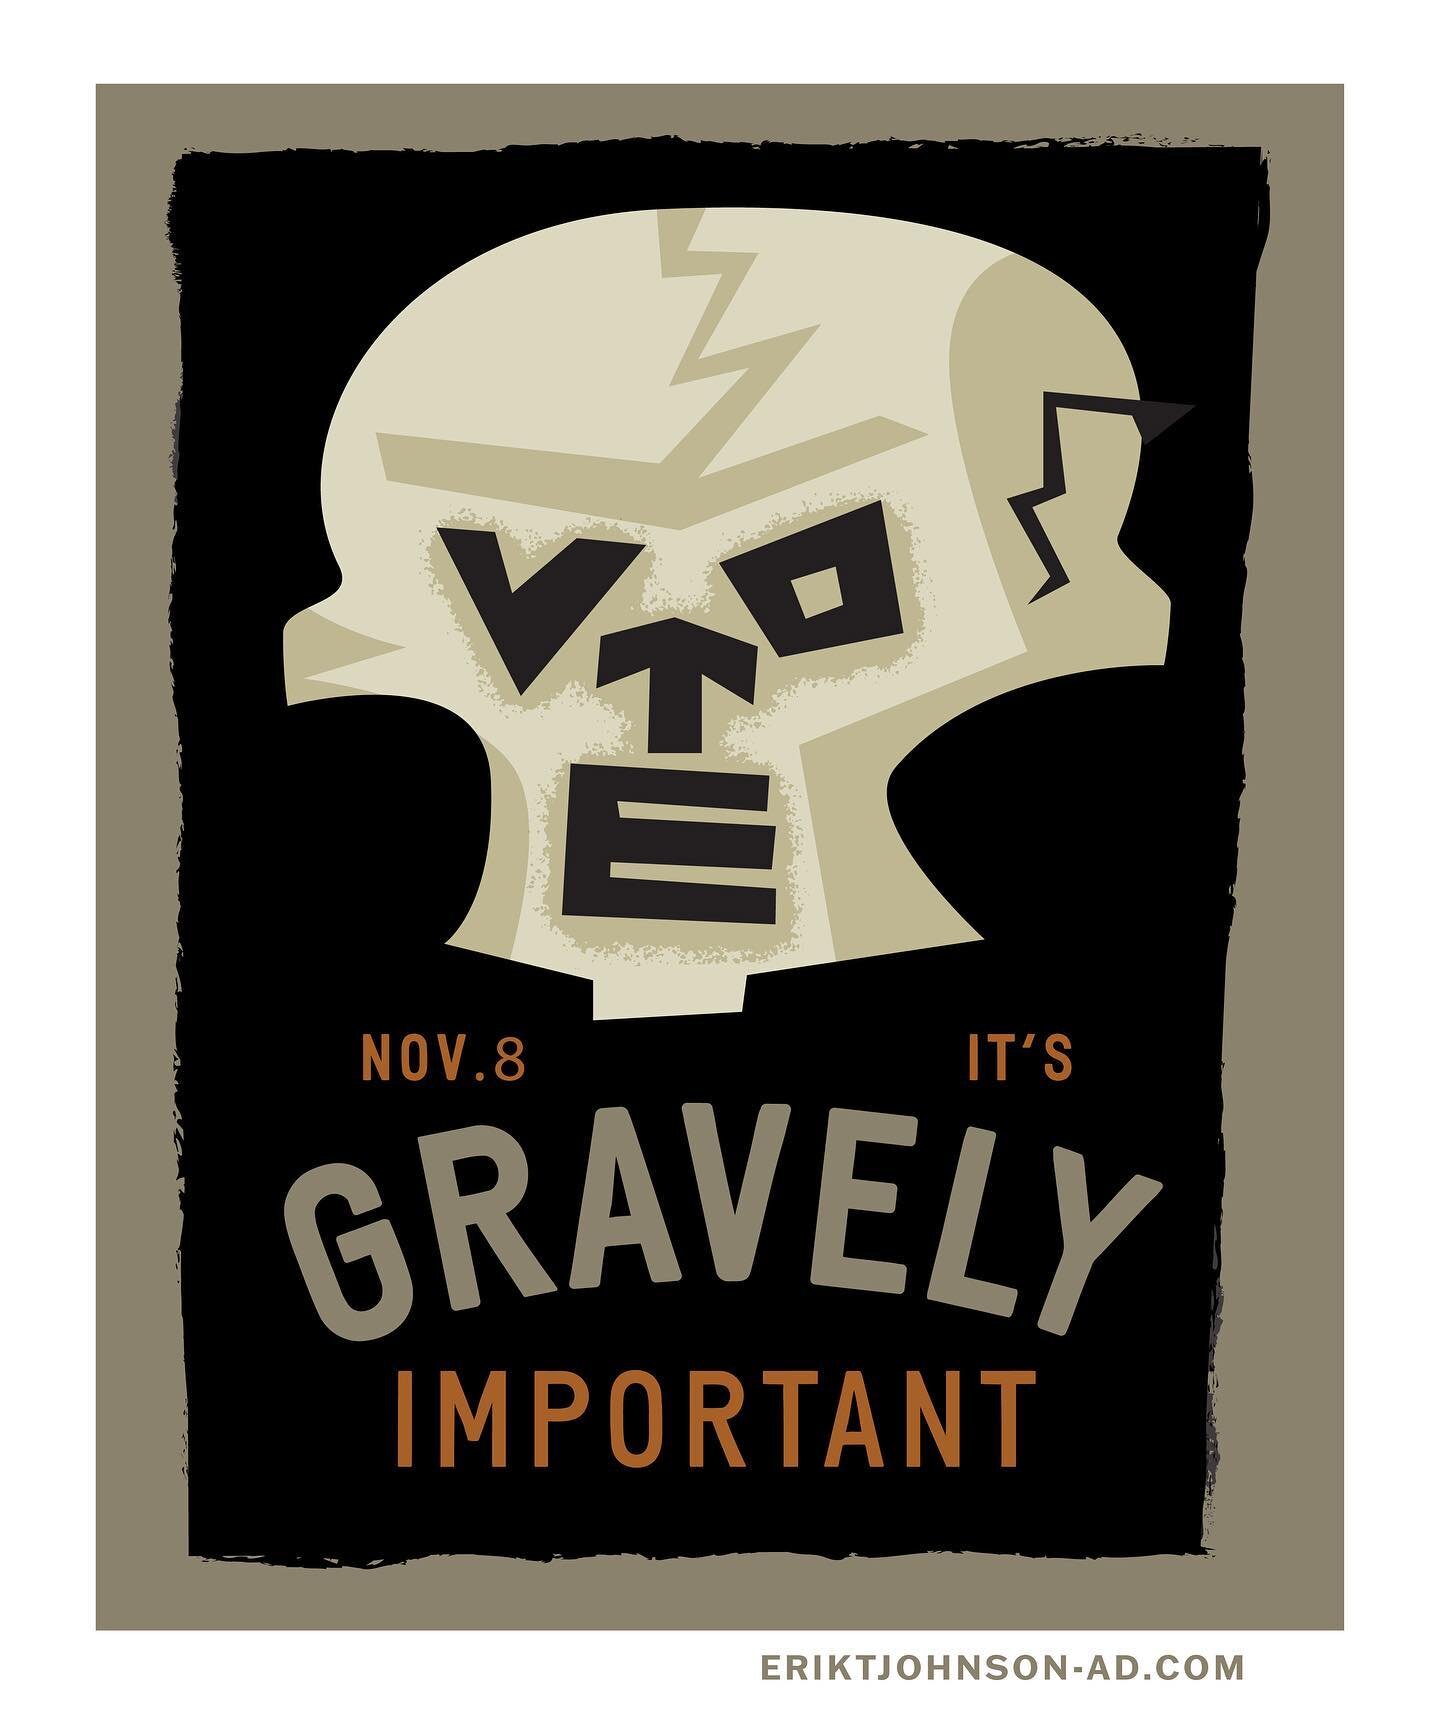 posting these all over since they expire today

#halloween #vote #autumn #election #vampire #skeleton #pumpkin #2022midterms #illustration #artdirection #vectorillustration #vectorart #graphicdesign #art #design #artistsoninstagram